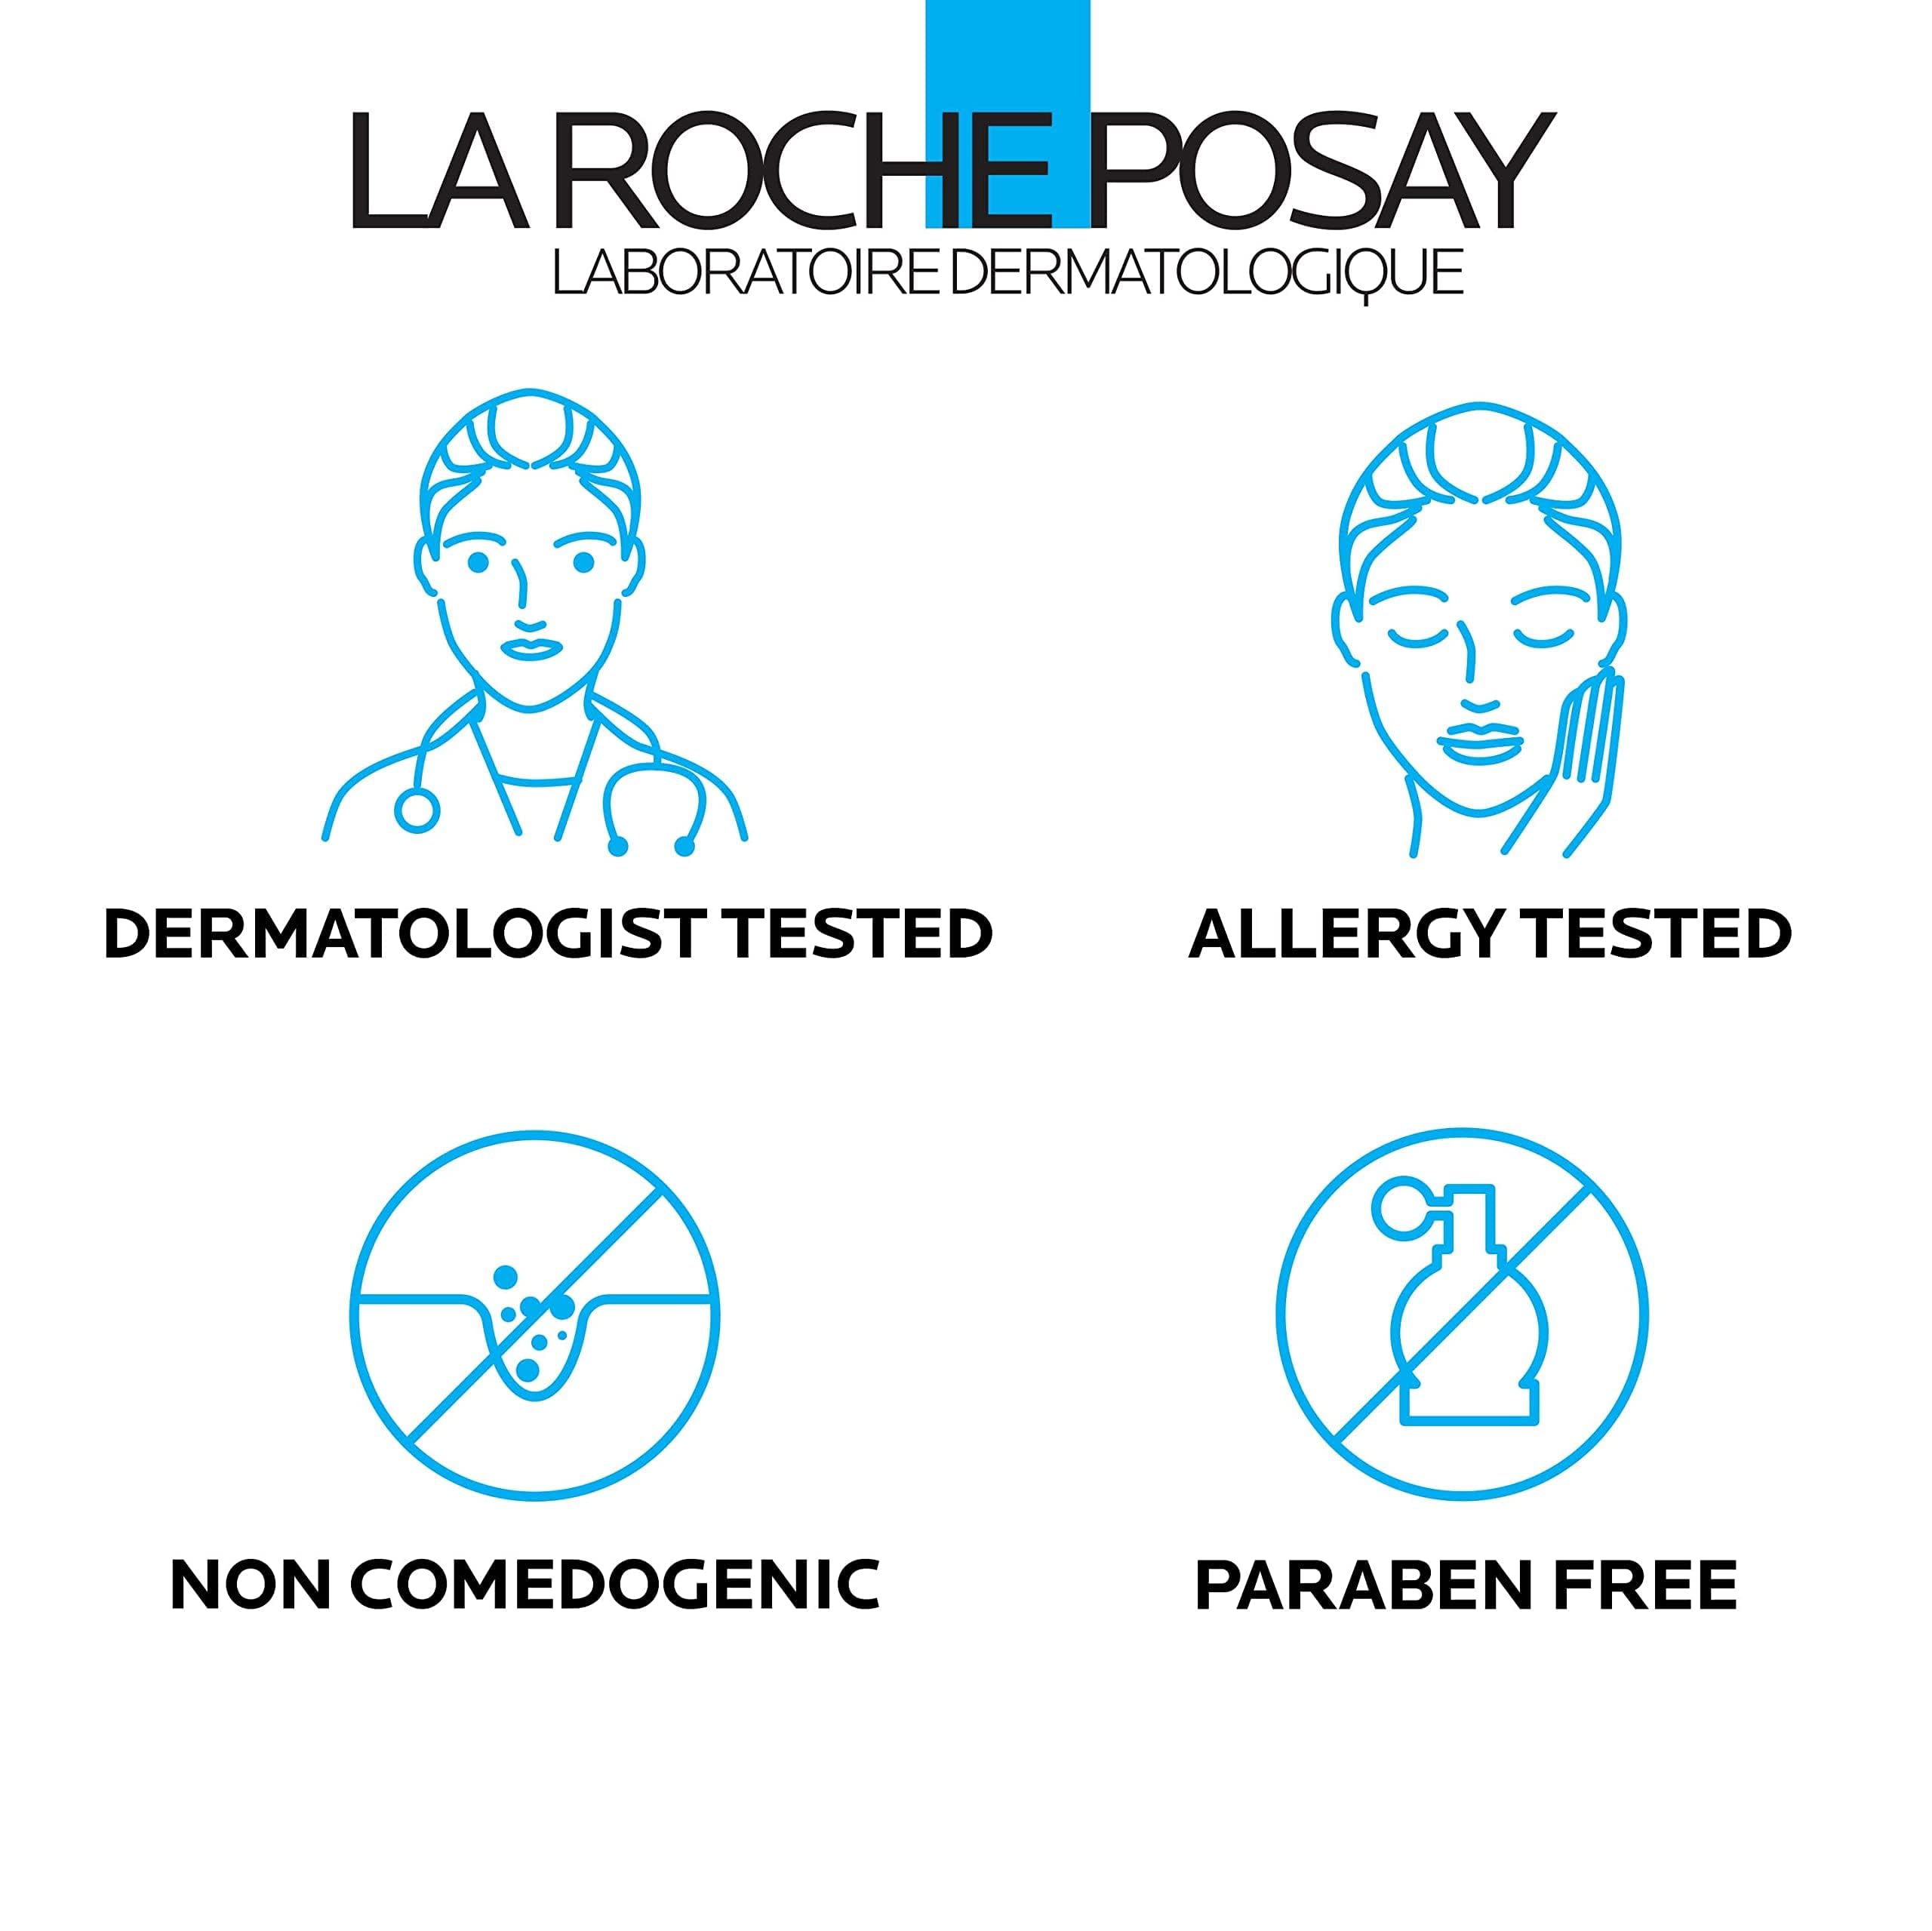 La Roche-Posay Effaclar Salicylic Acid Acne Treatment to Minimize Pores, Clear Acne Blemishes and Post Acne Marks